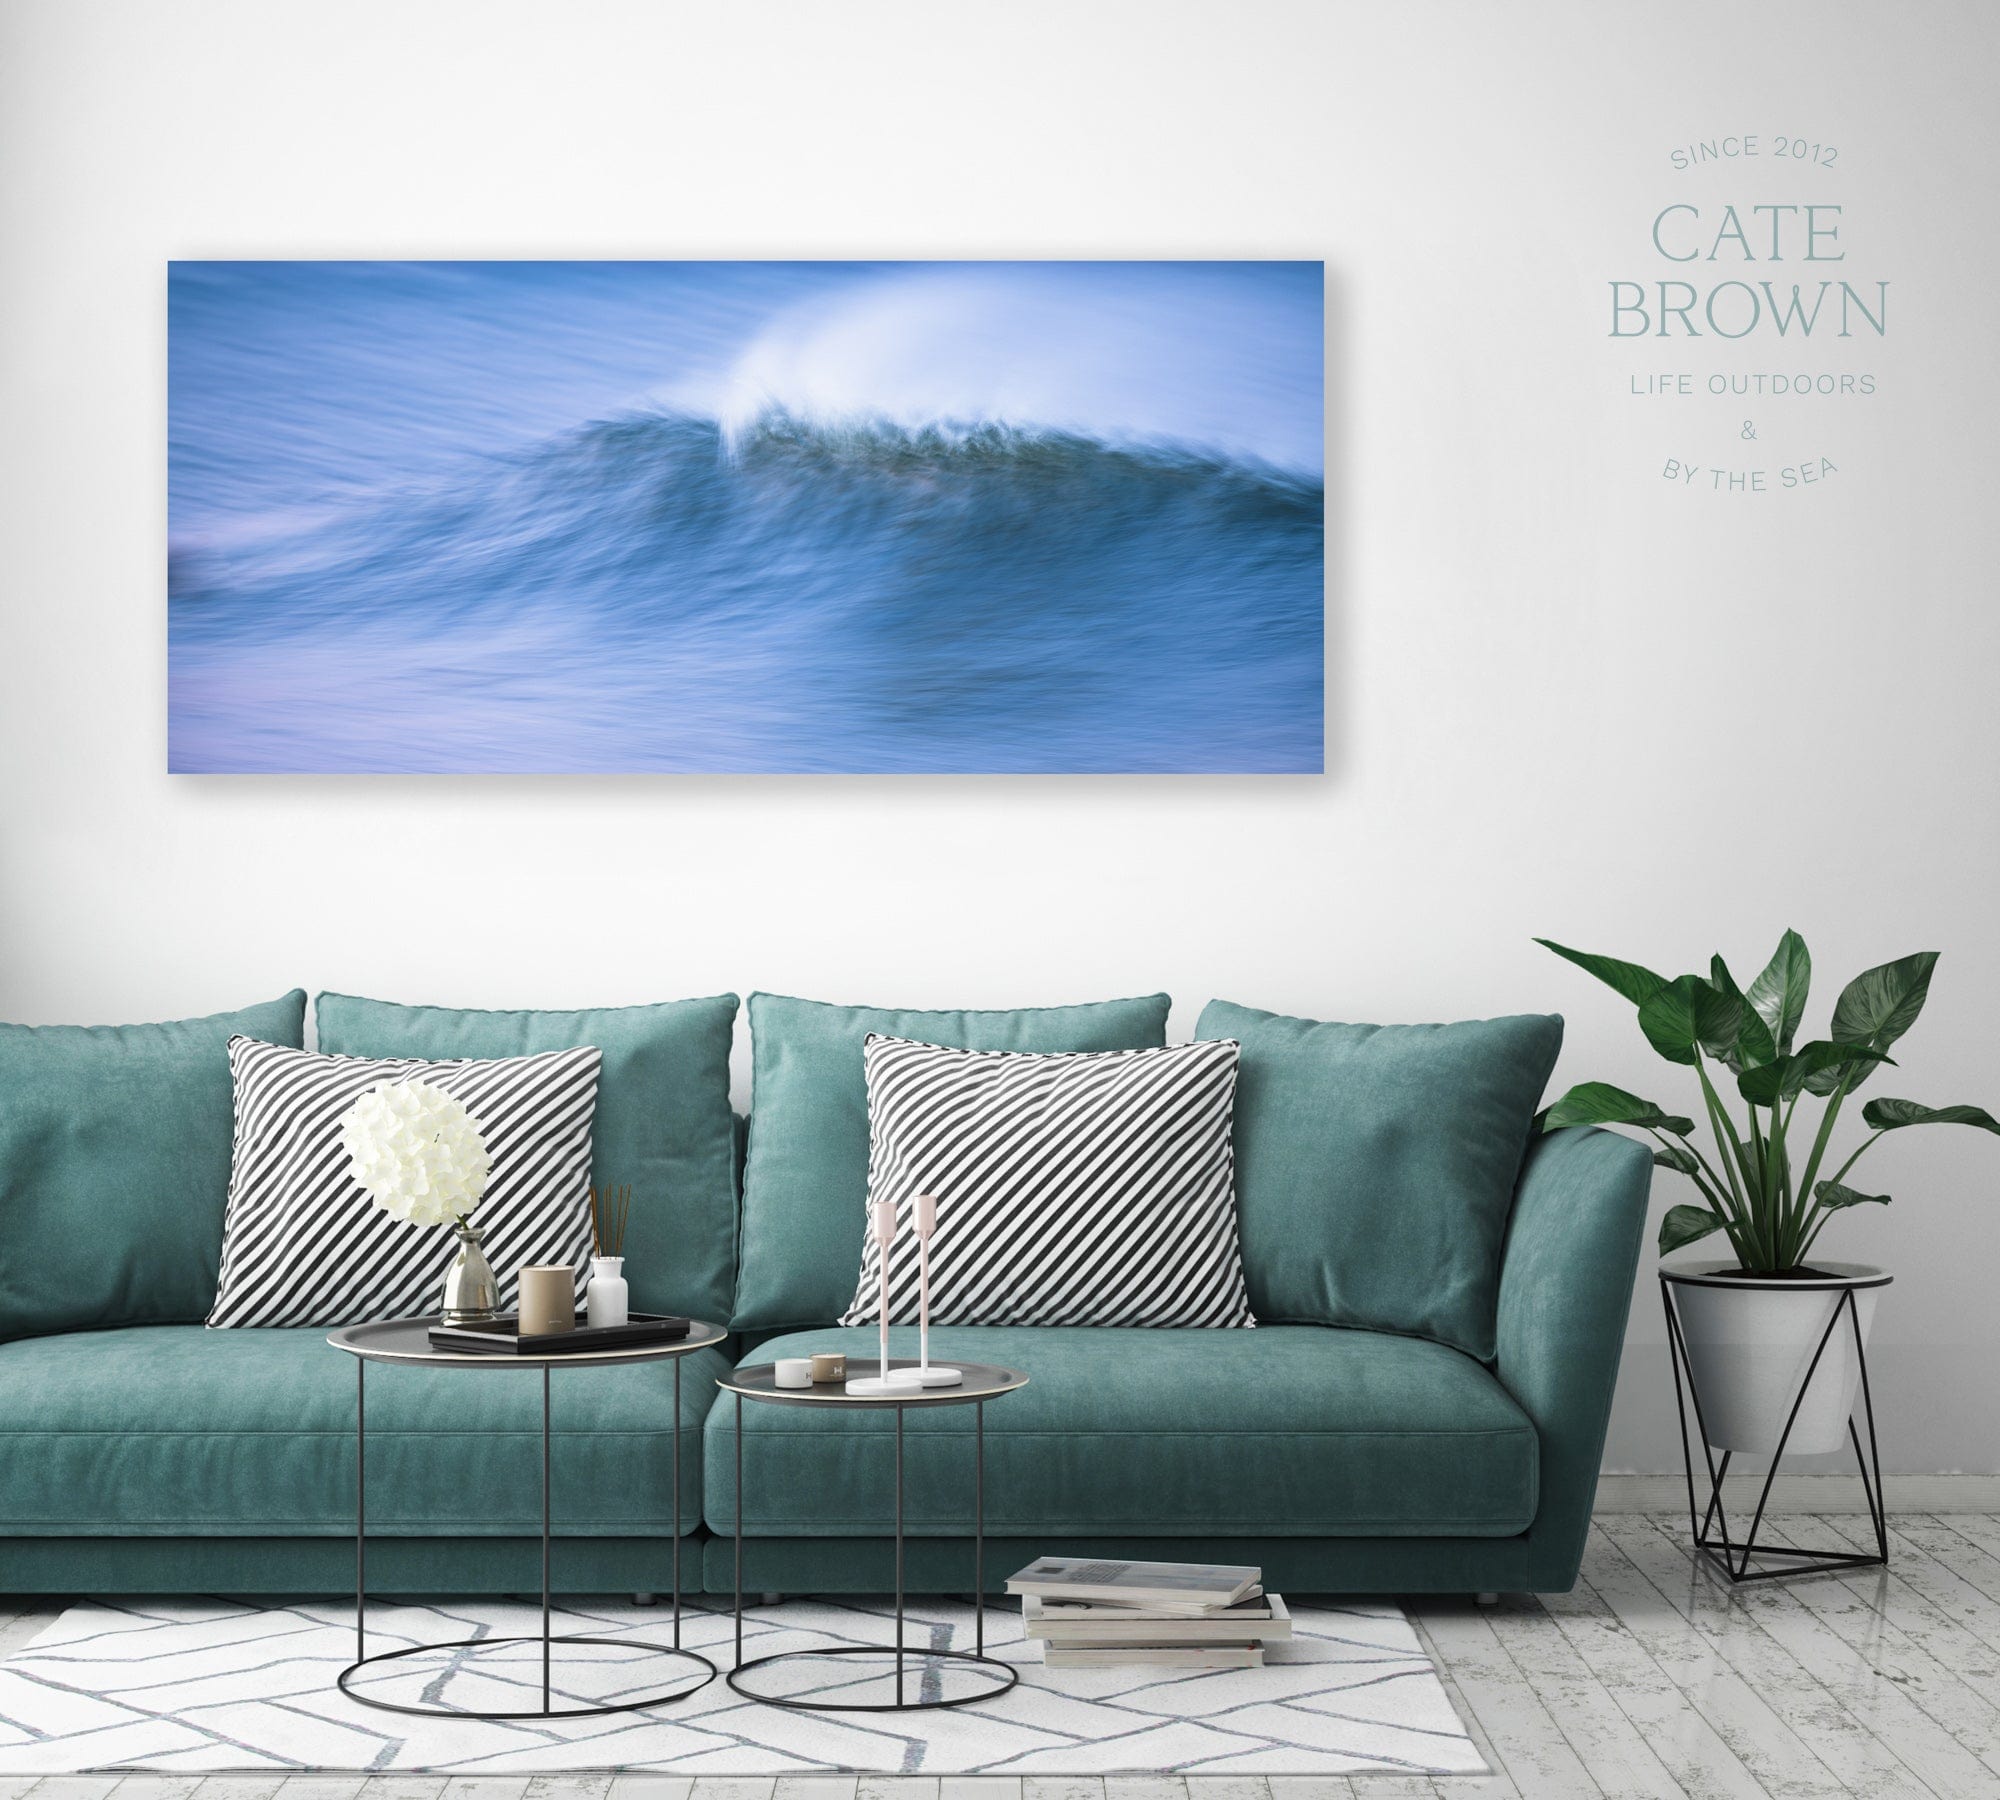 Cate Brown Photo Metal / 12"x27" / None (Print Only) Twilight in Motion  //  Seascape Photography Made to Order Ocean Fine Art